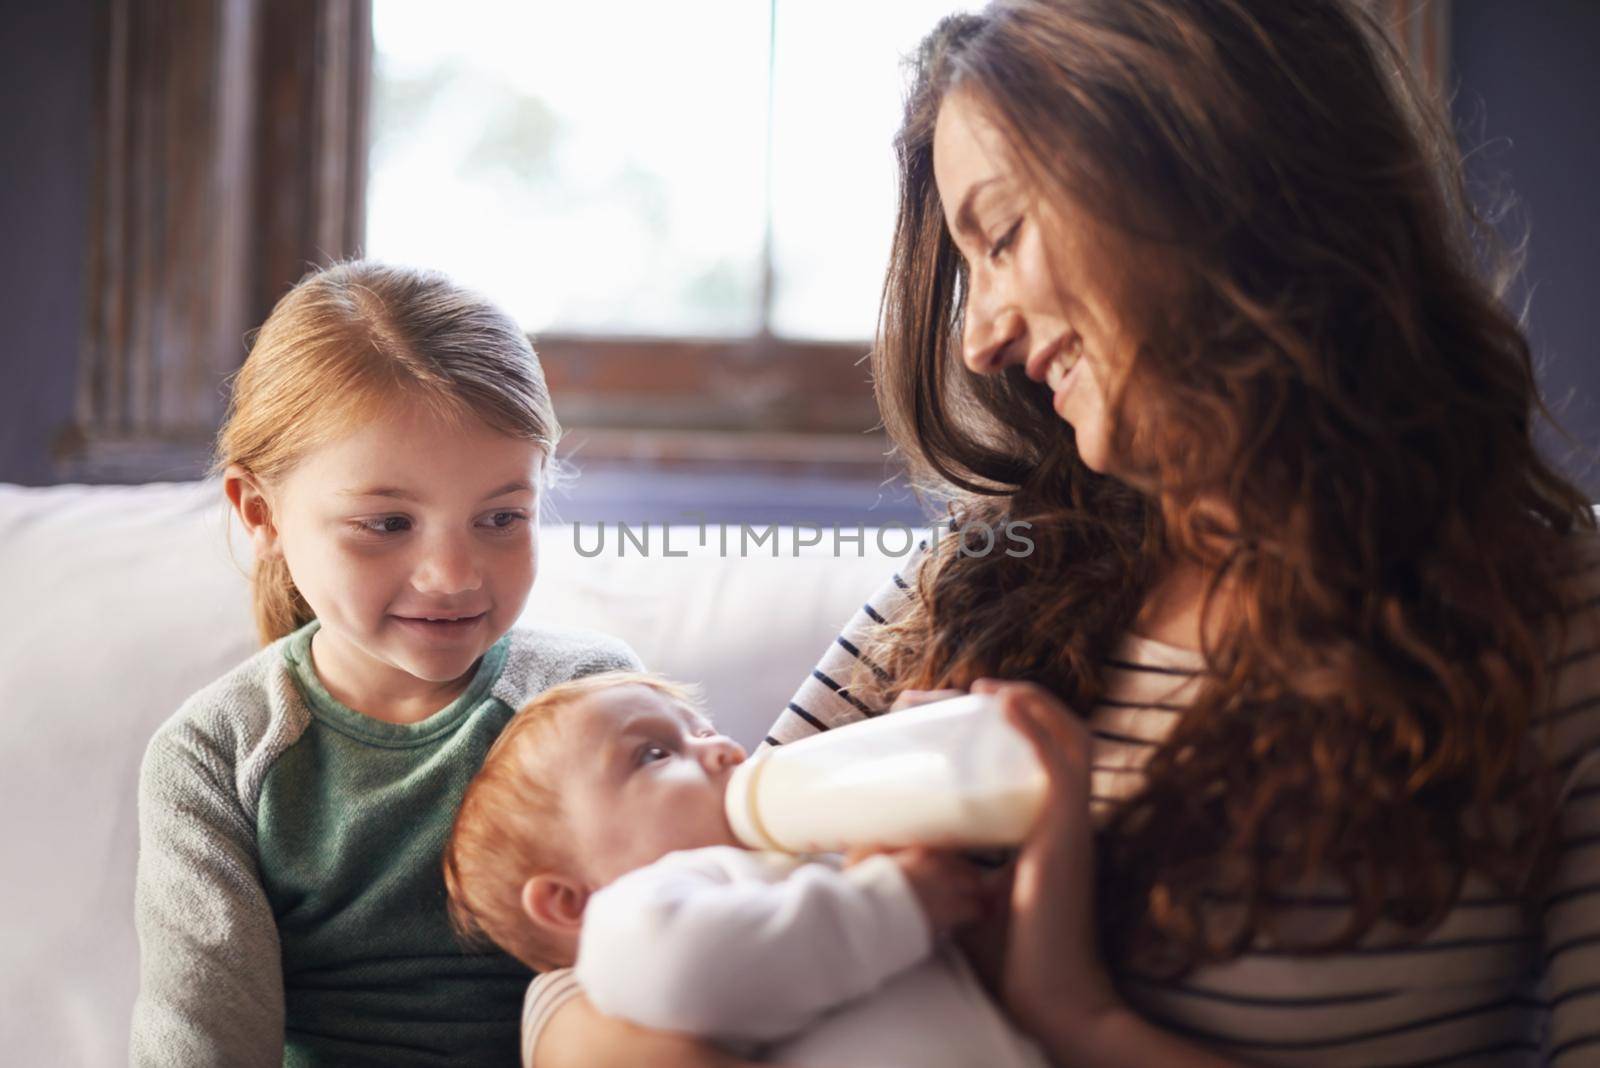 She loves her little sister. A shot of a family spending time together while mom nurses baby